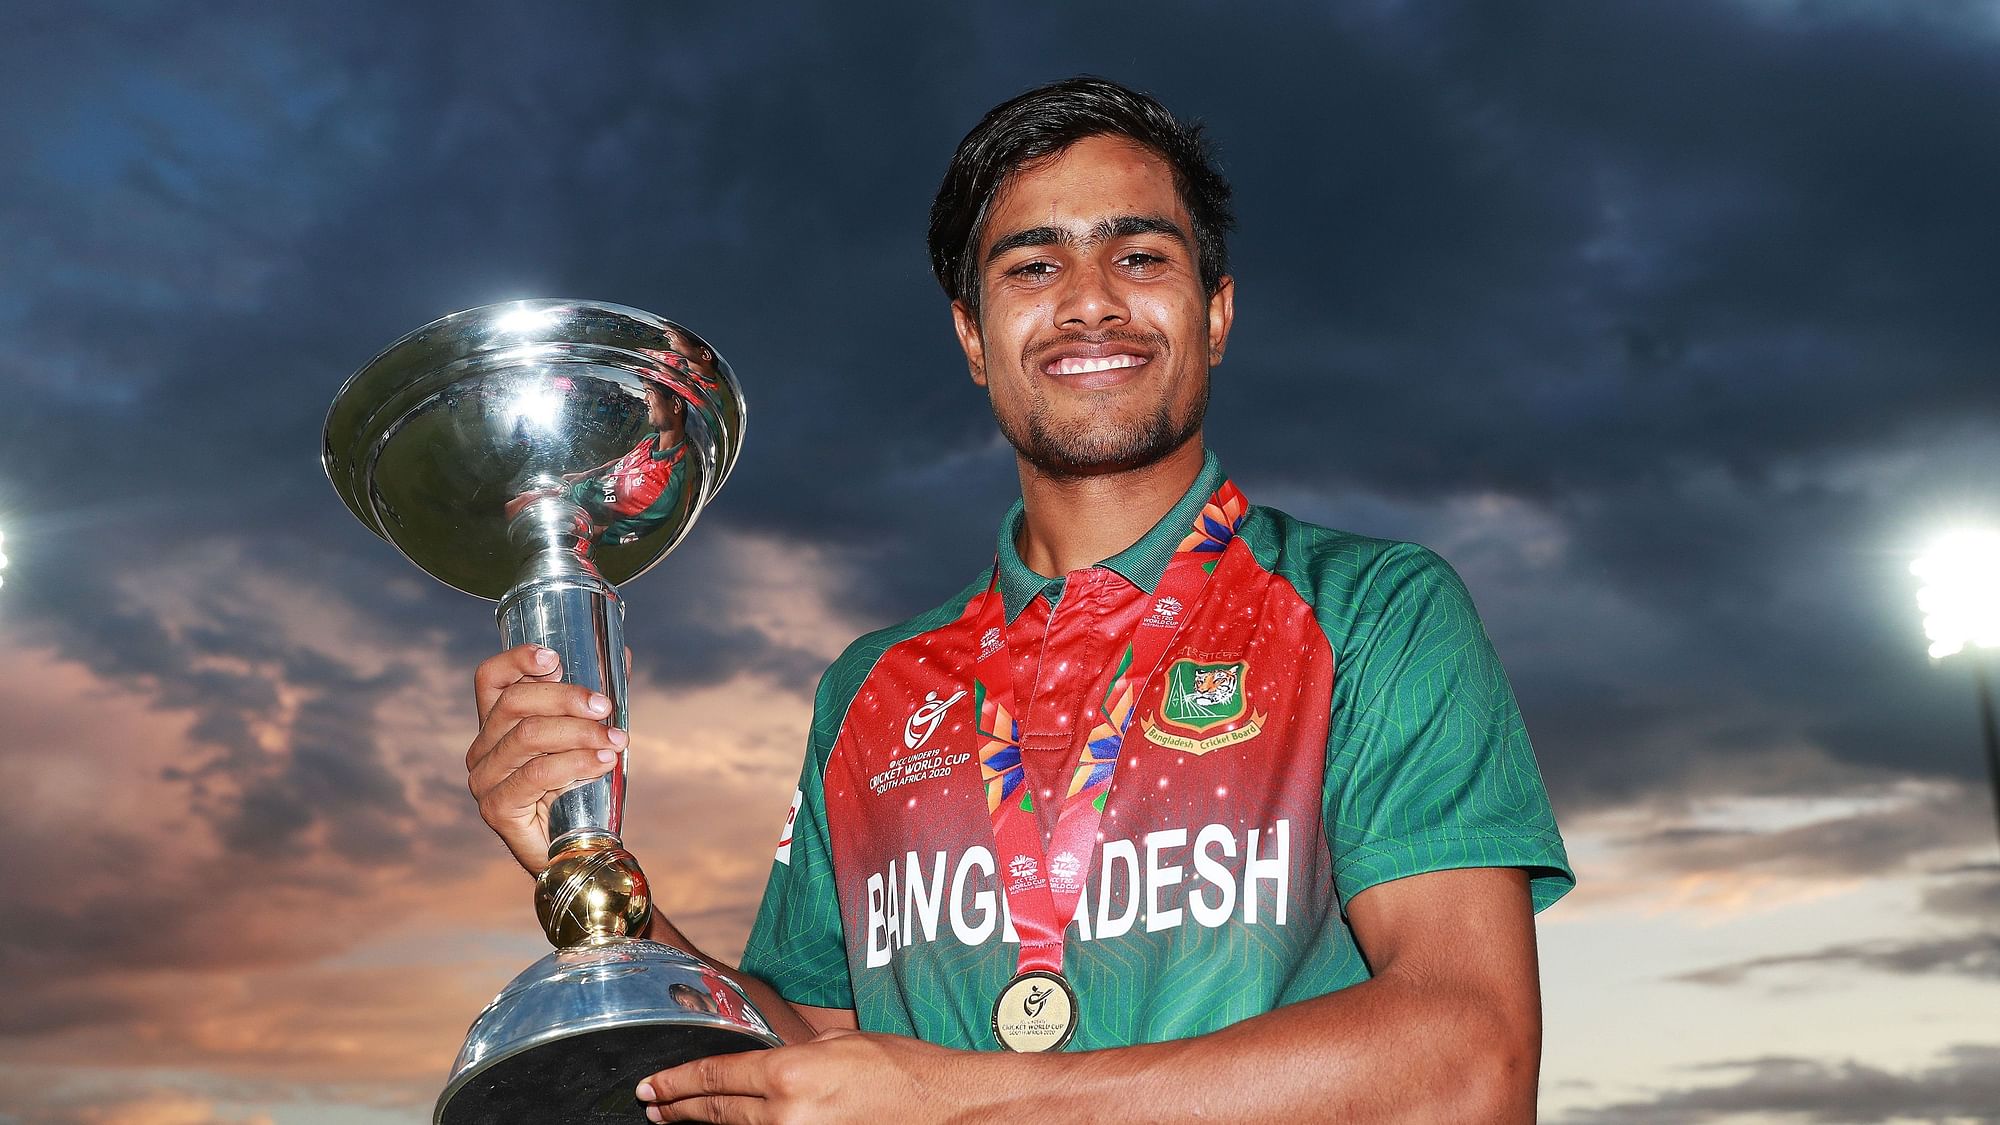 Bangladesh captain Akbar Ali lost his elder sister while he was playing the ICC Under-19 World Cup.